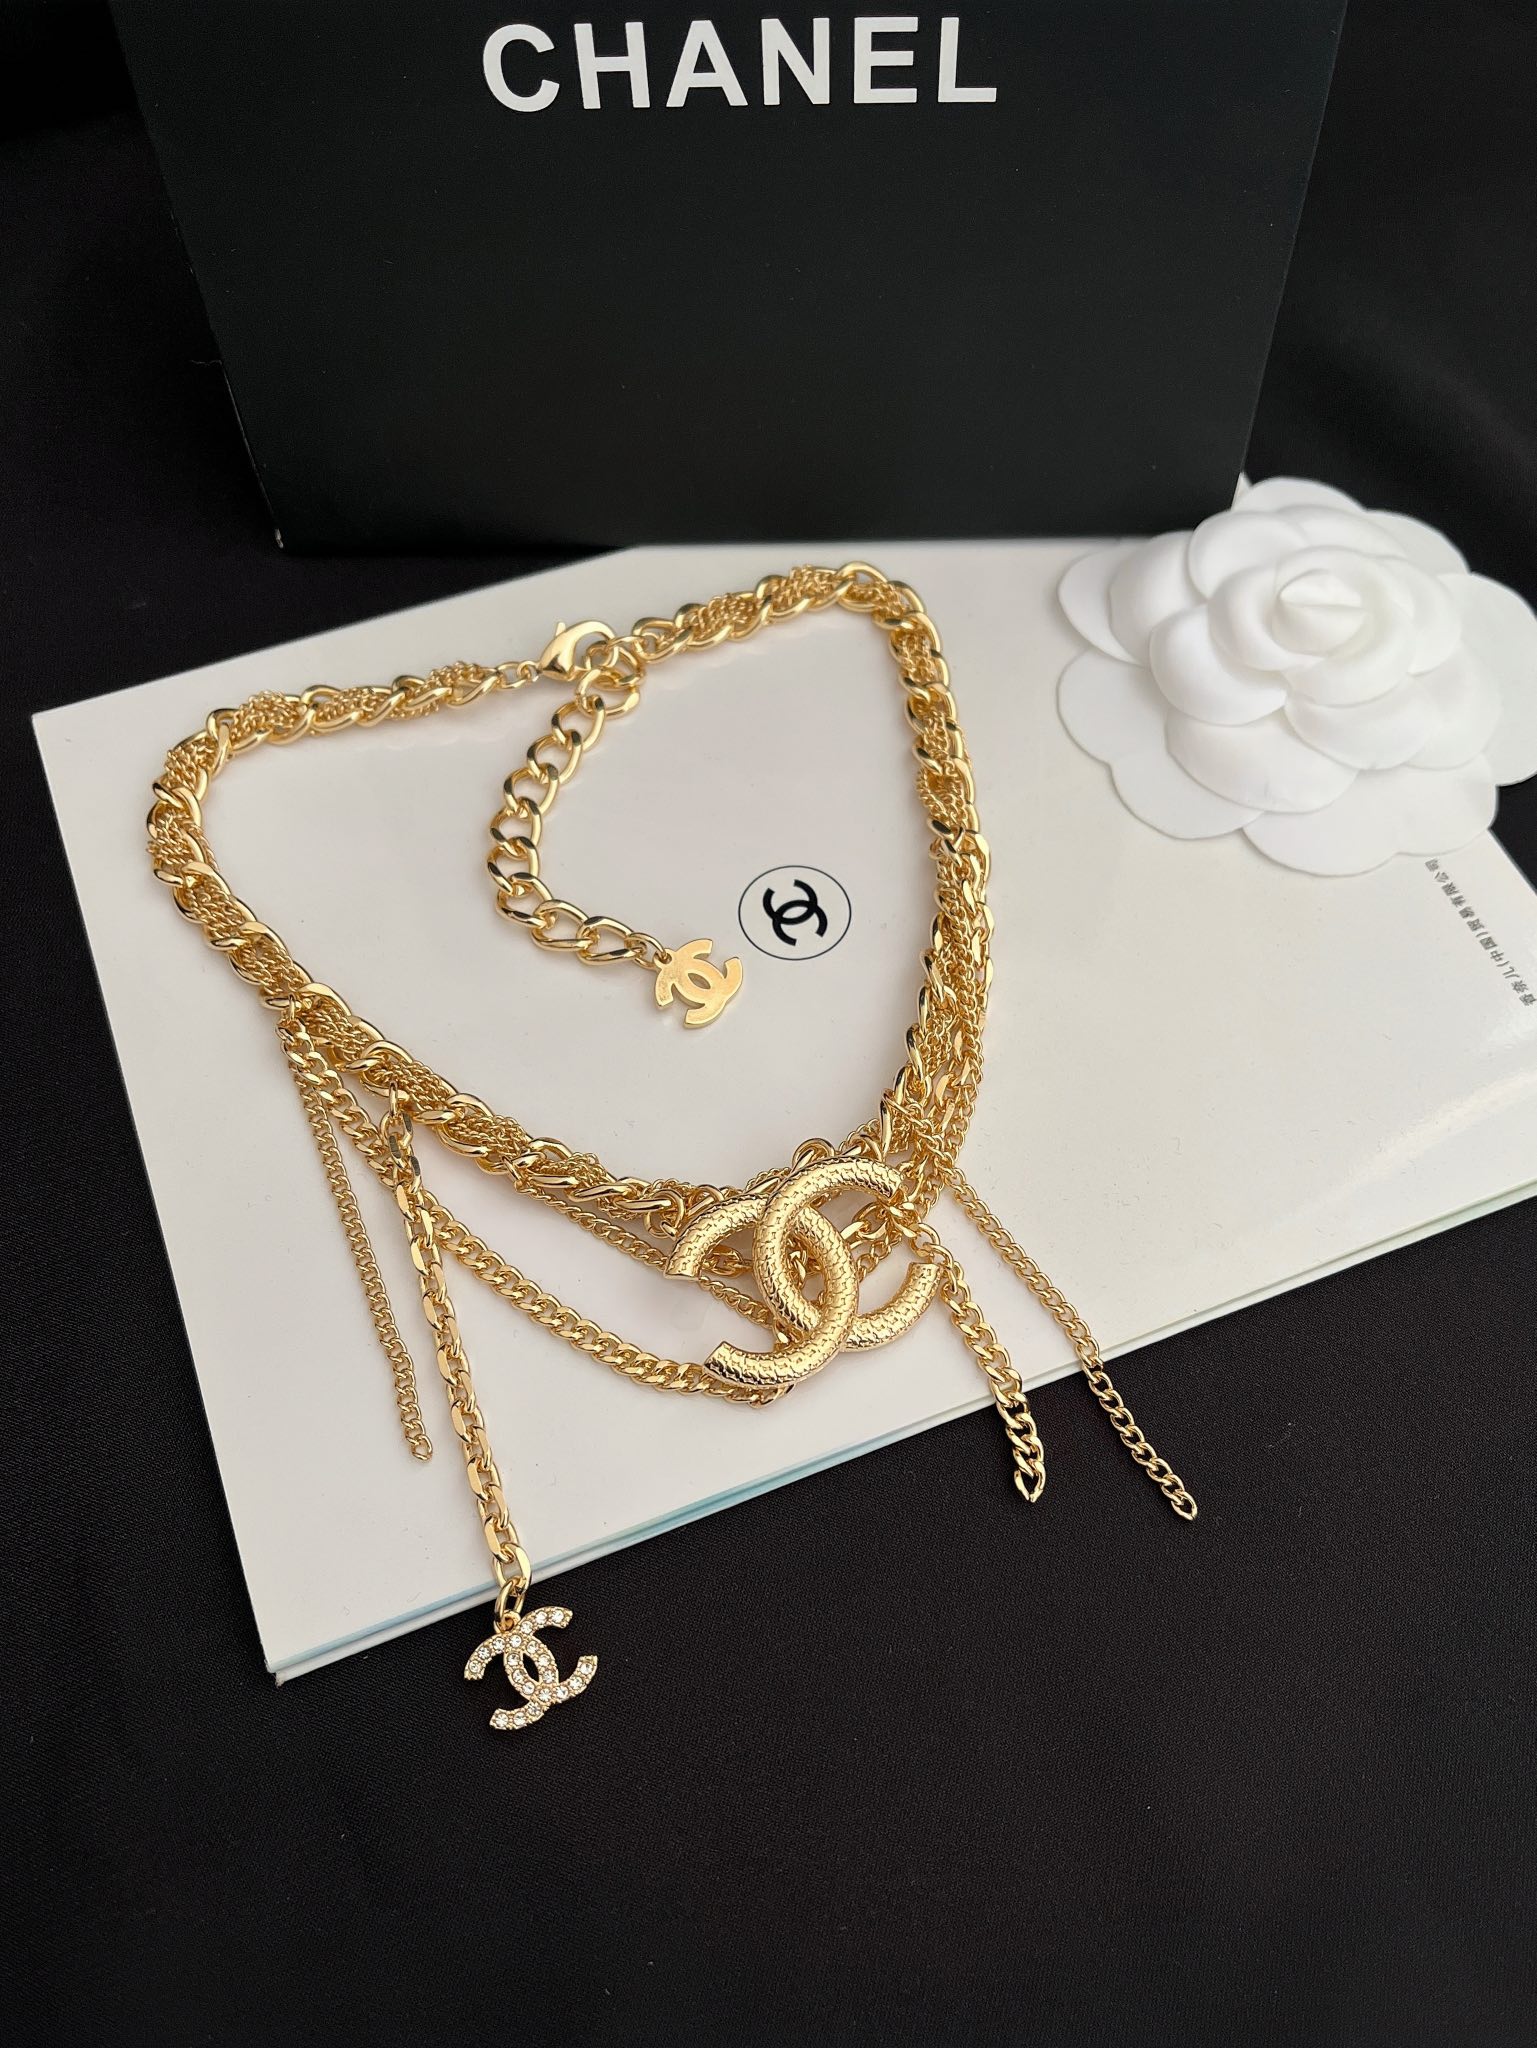 X578  Chanel choker necklace